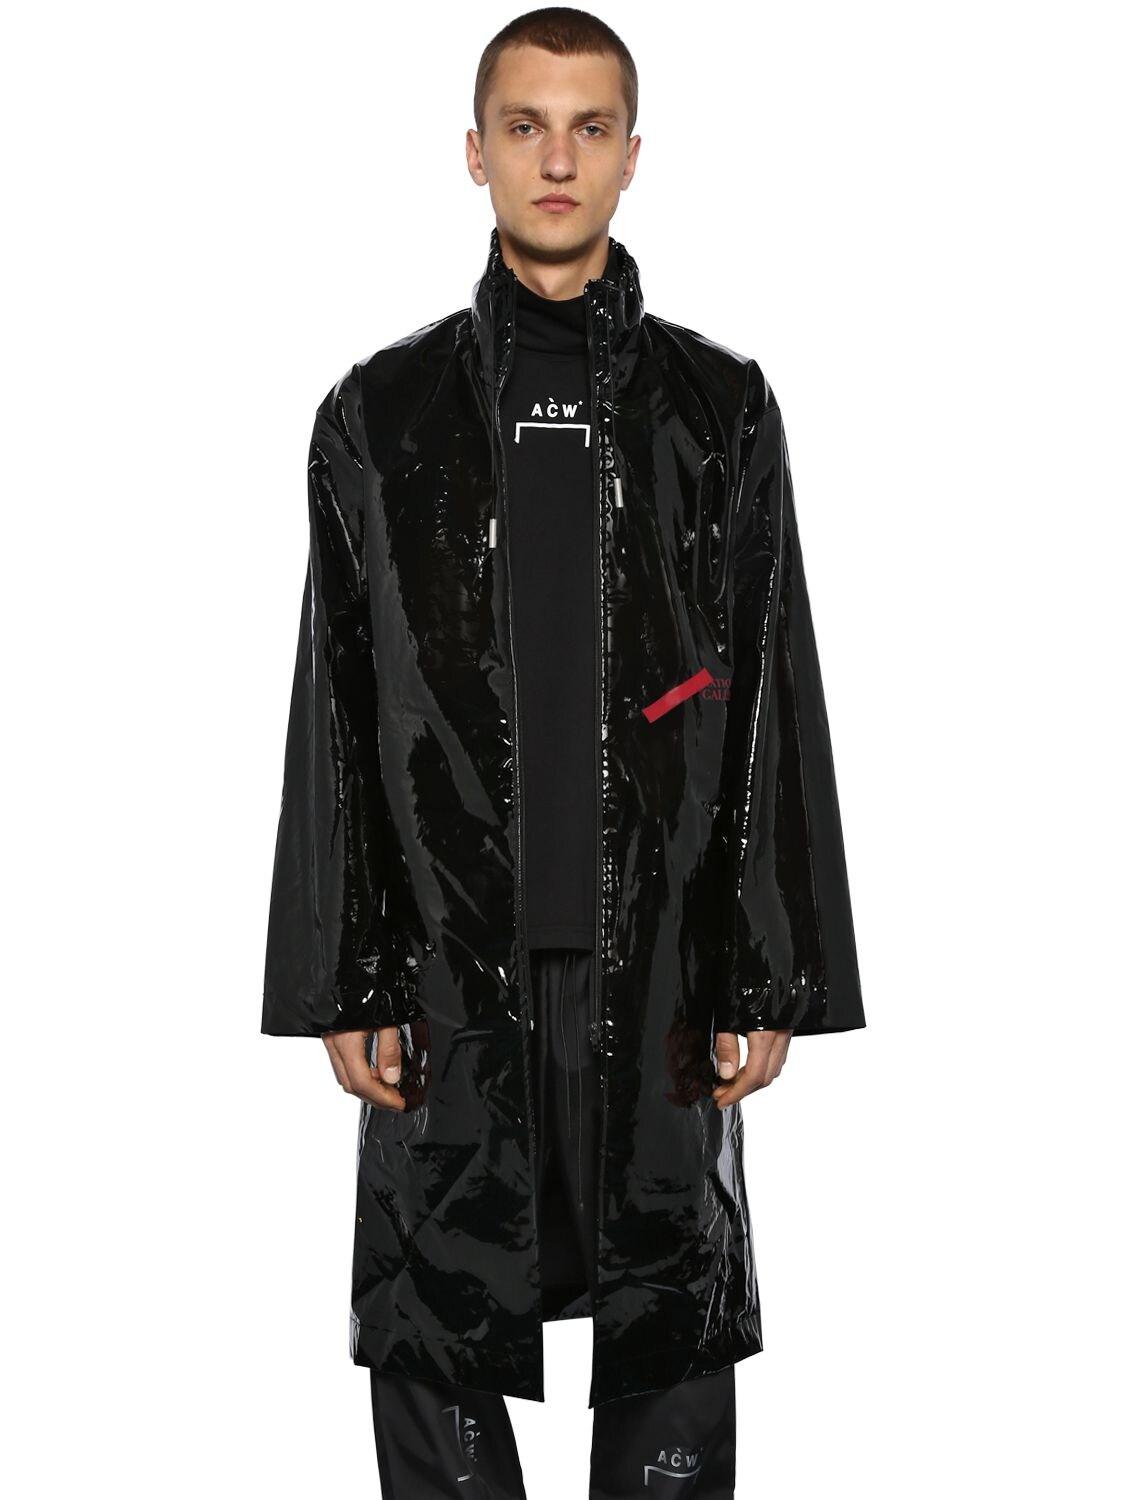 A_COLD_WALL* Printed Pvc Raincoat in Black for Men - Lyst